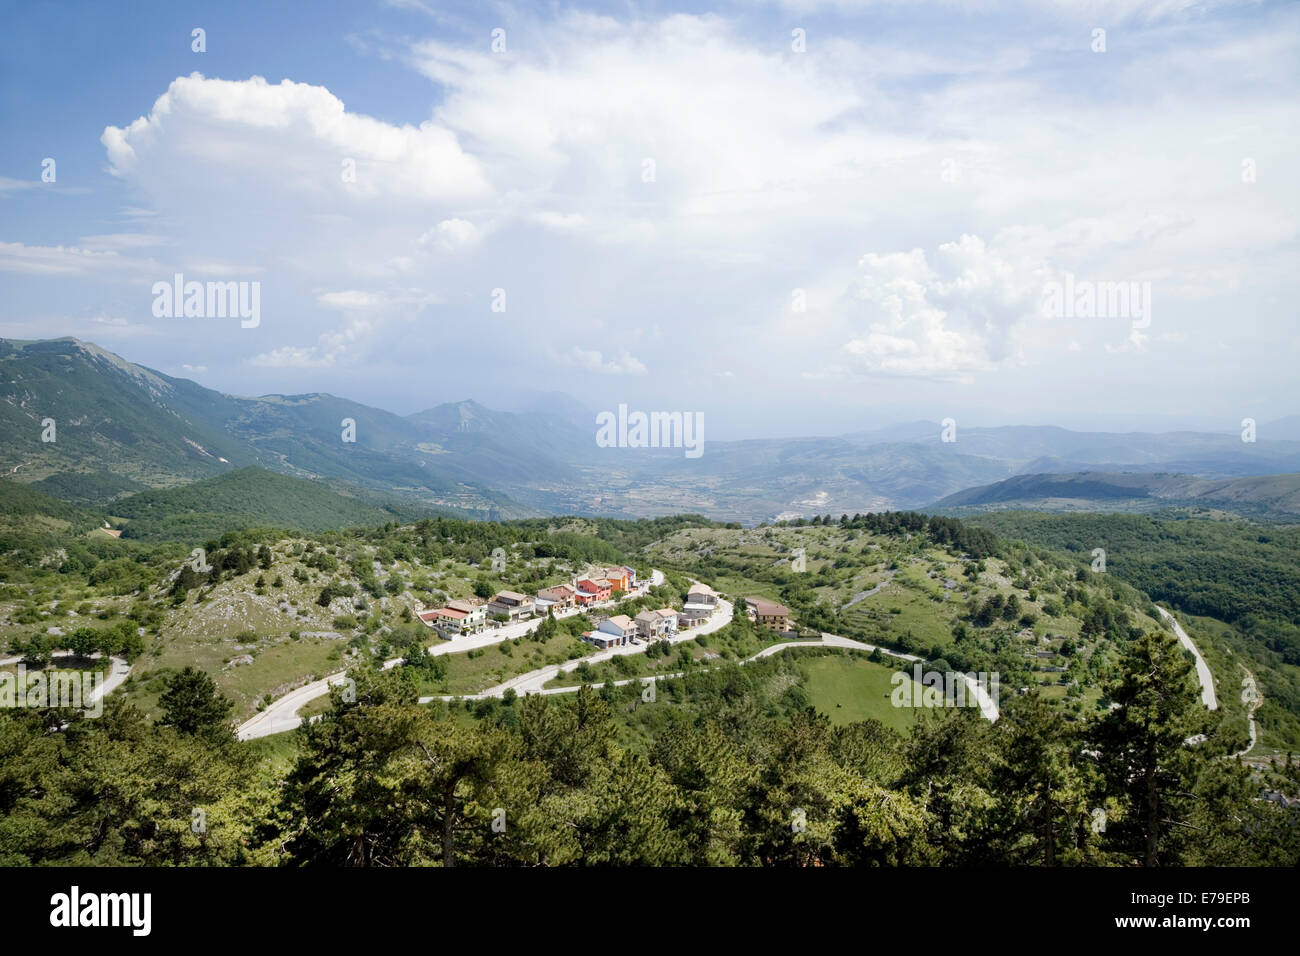 Abruzzese landscape in Italy at twilight showing a small village in the distance Stock Photo